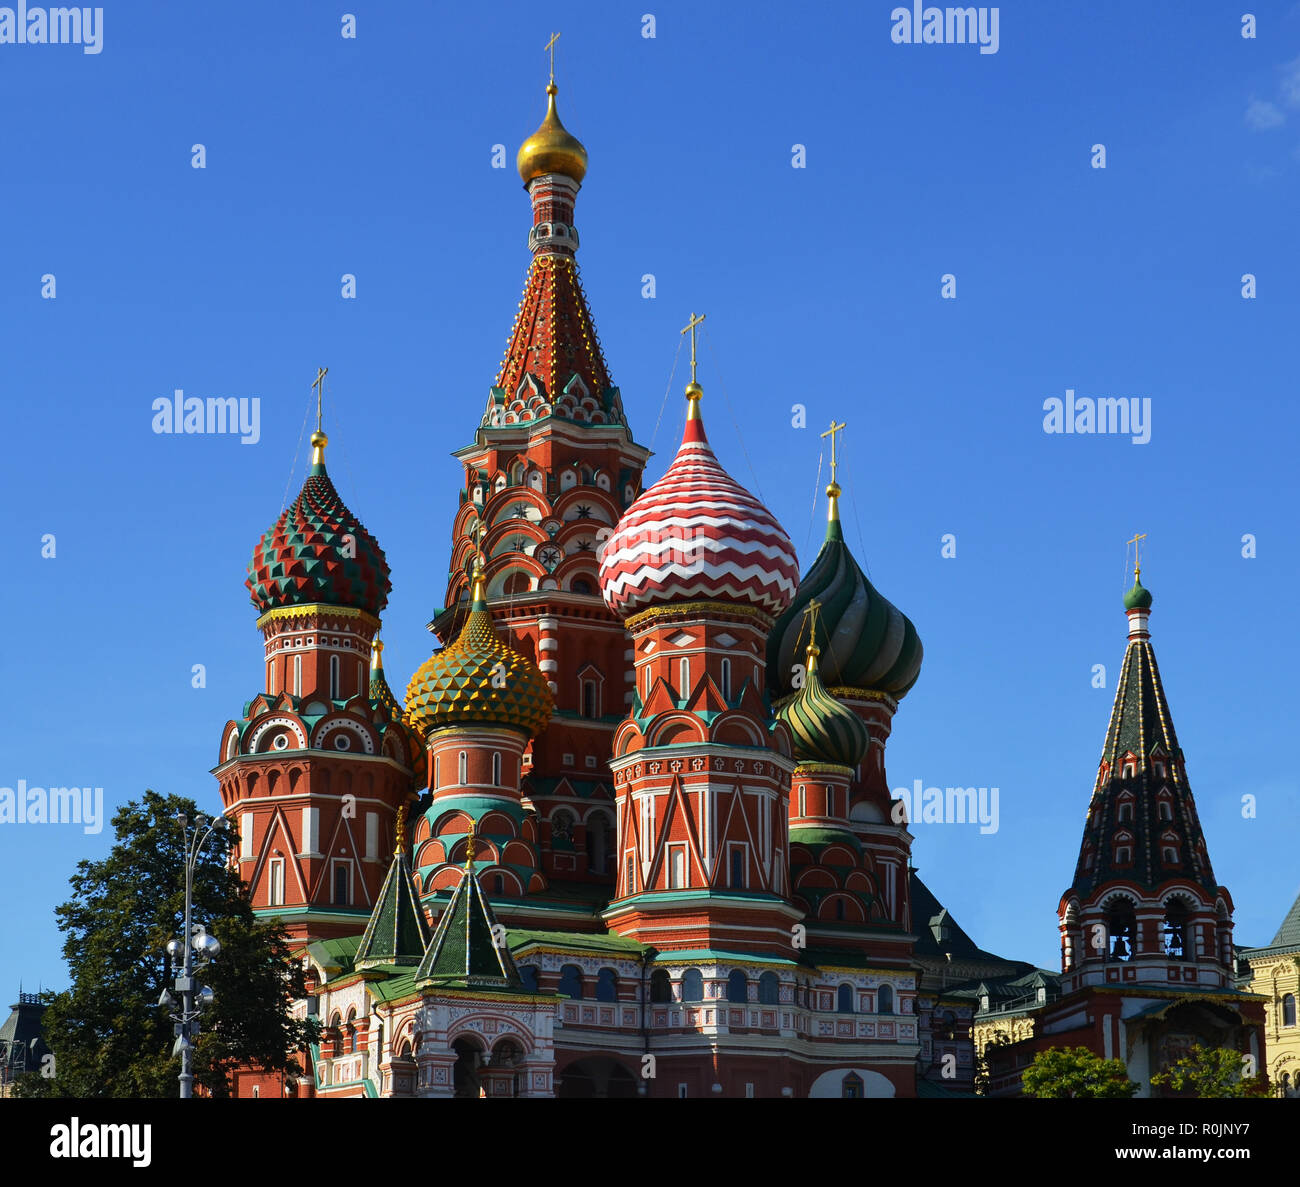 Stock image St. Basil's Cathedral in Kremlin Moscow city, Russia. Photography Stock Photo